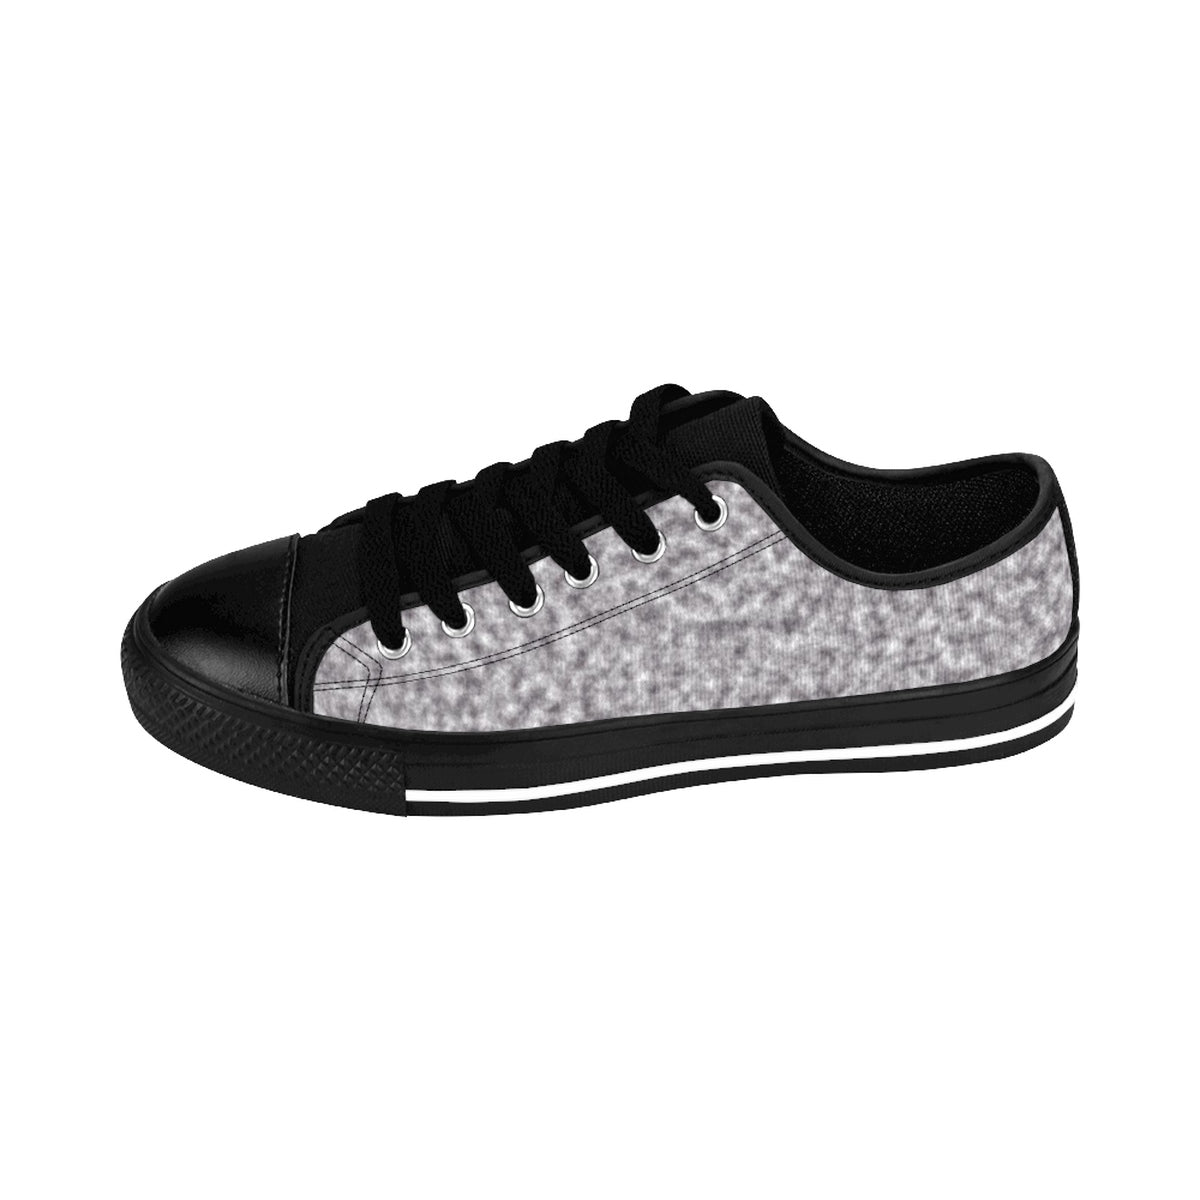 Gray and White Clouds Women's Sneakers